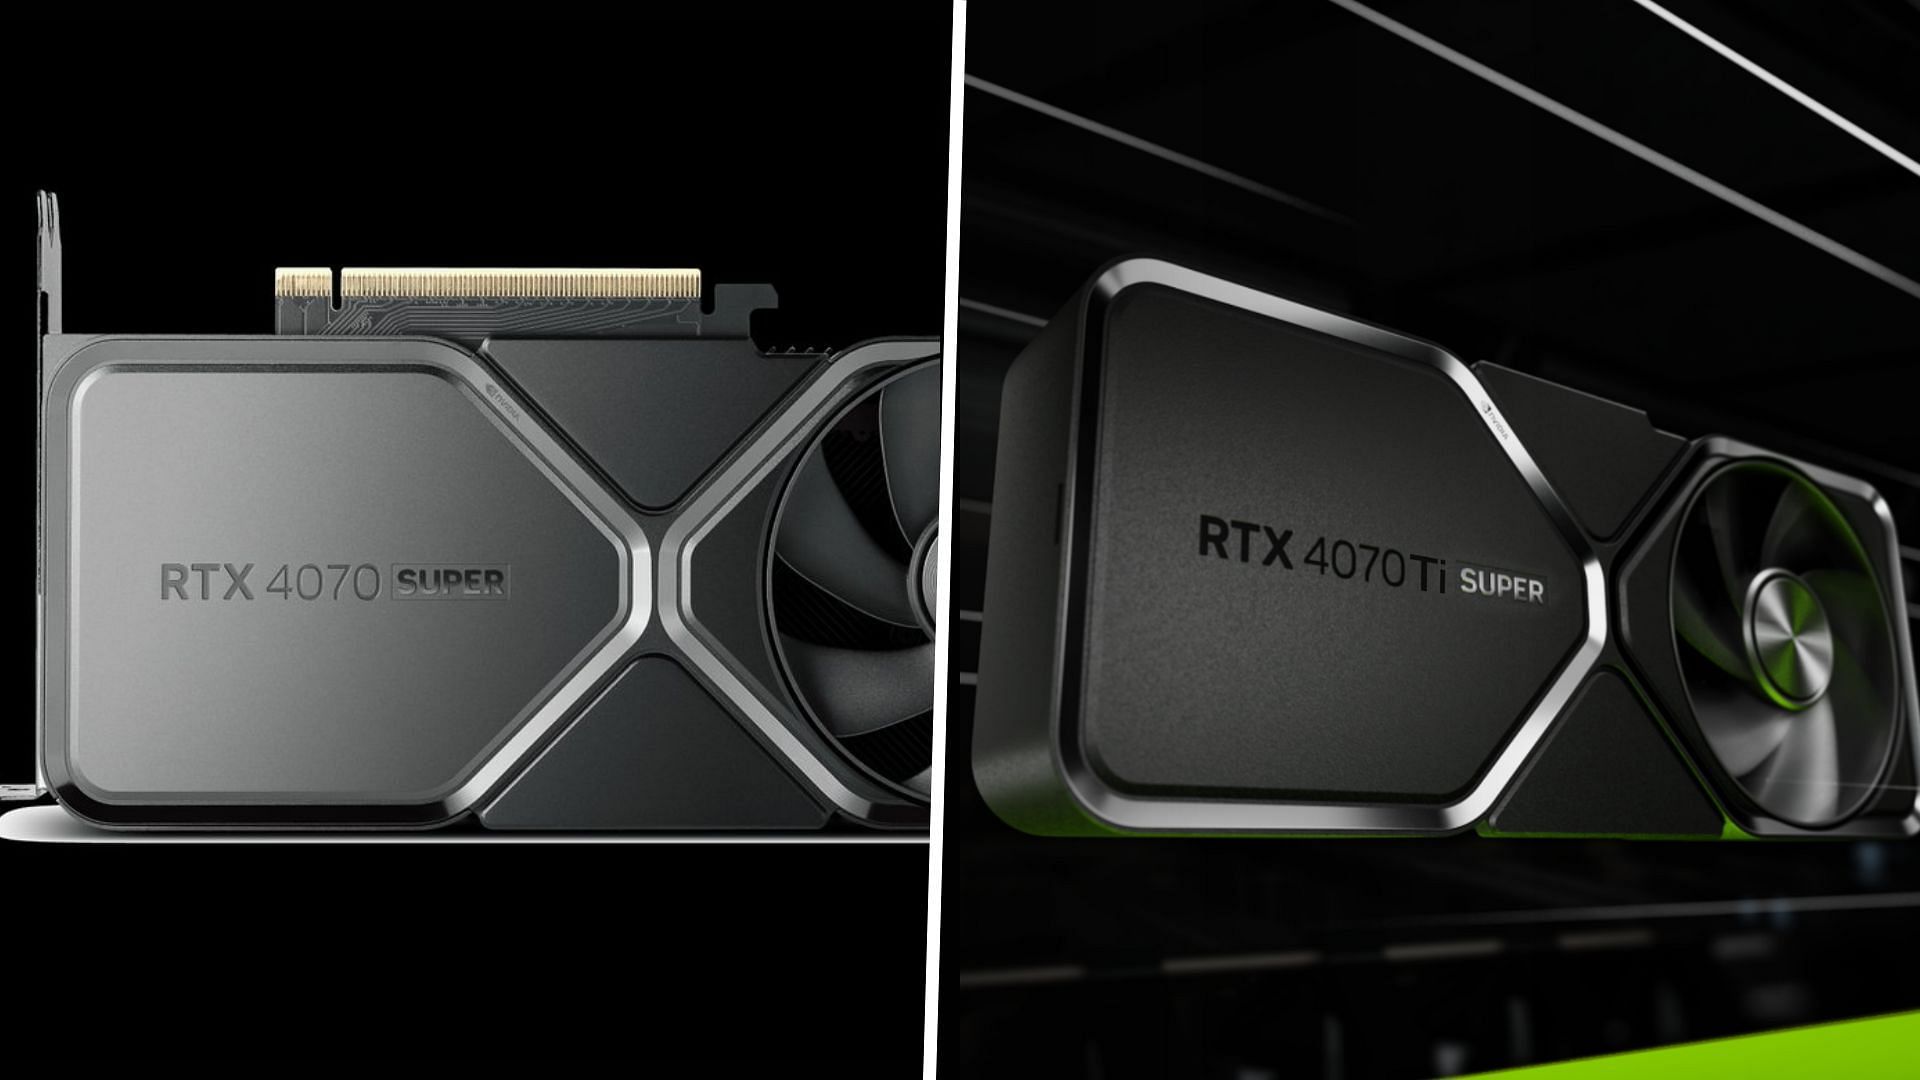 The RTX 4070 Super and RTX 4070 Ti Super are superb graphics cards for AAA gaming (Image via Nvidia and Corsair)